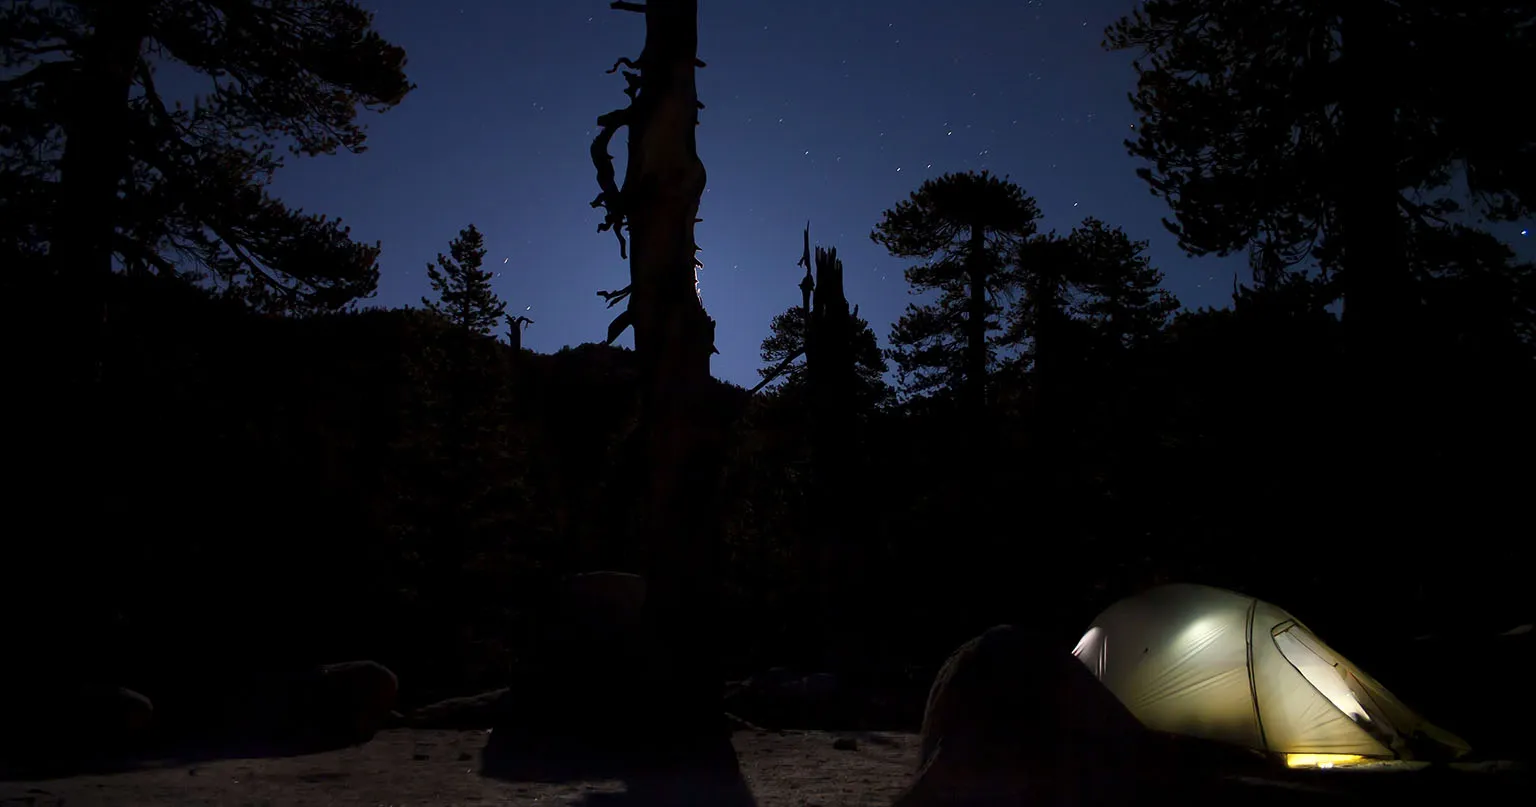 Campsite at night in Little Round Valley.